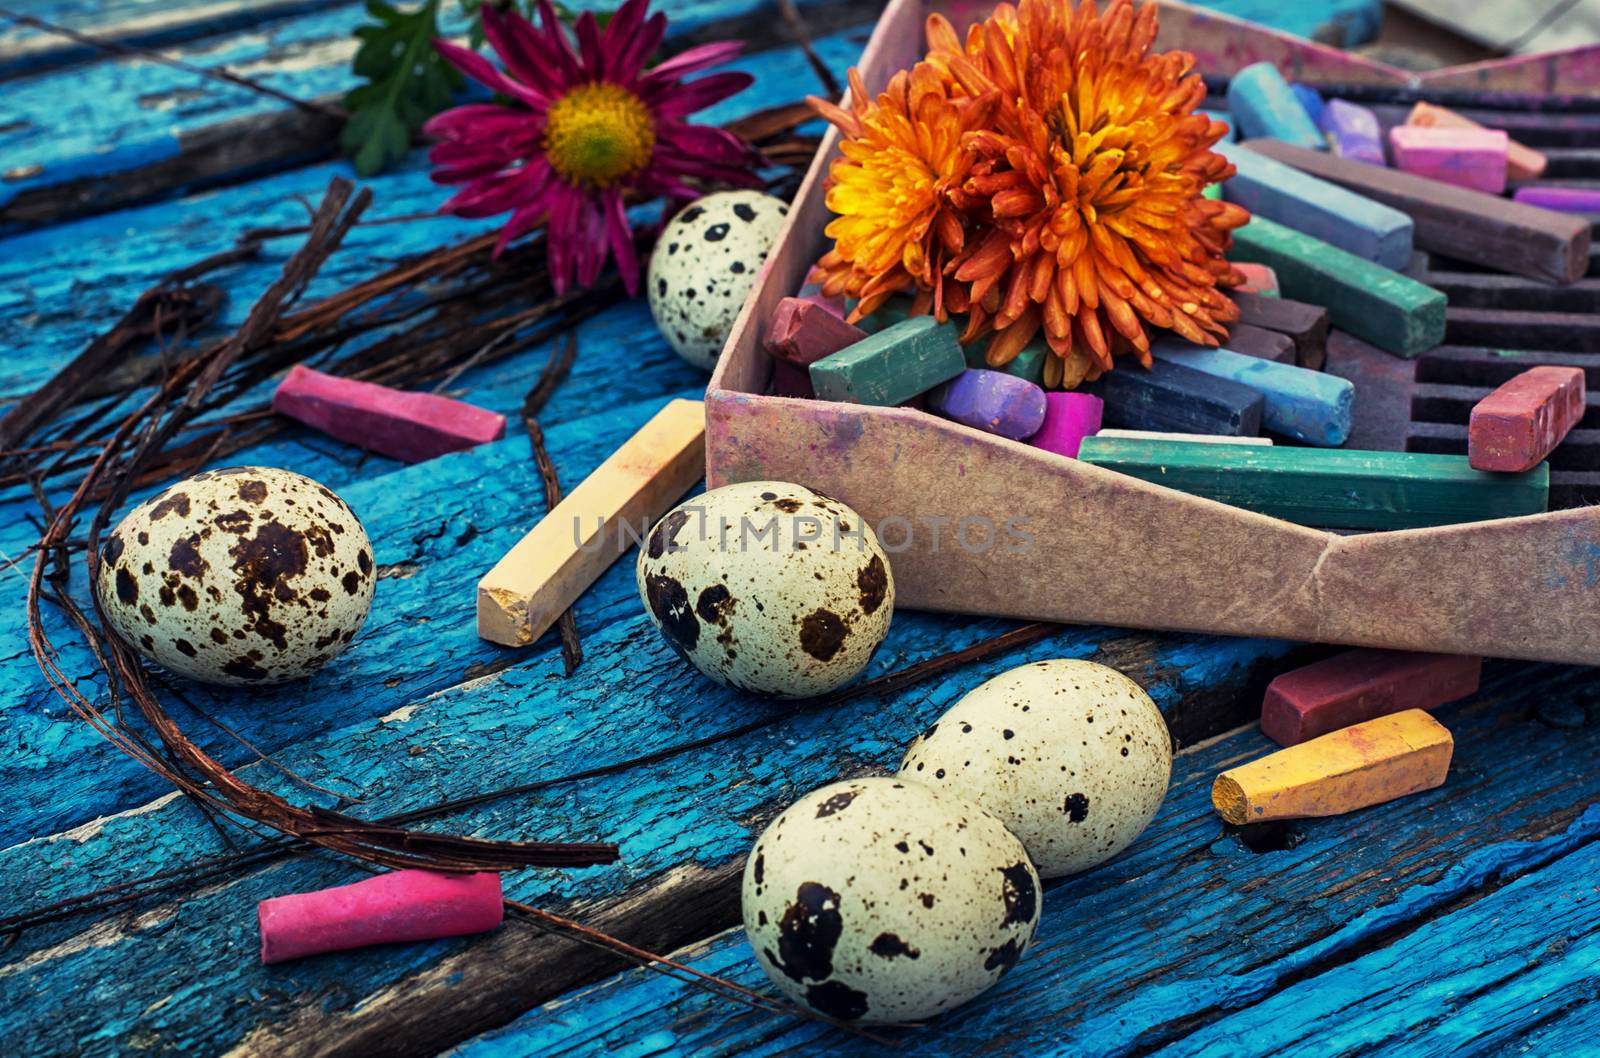 painted eggs for Easter on the background colorn